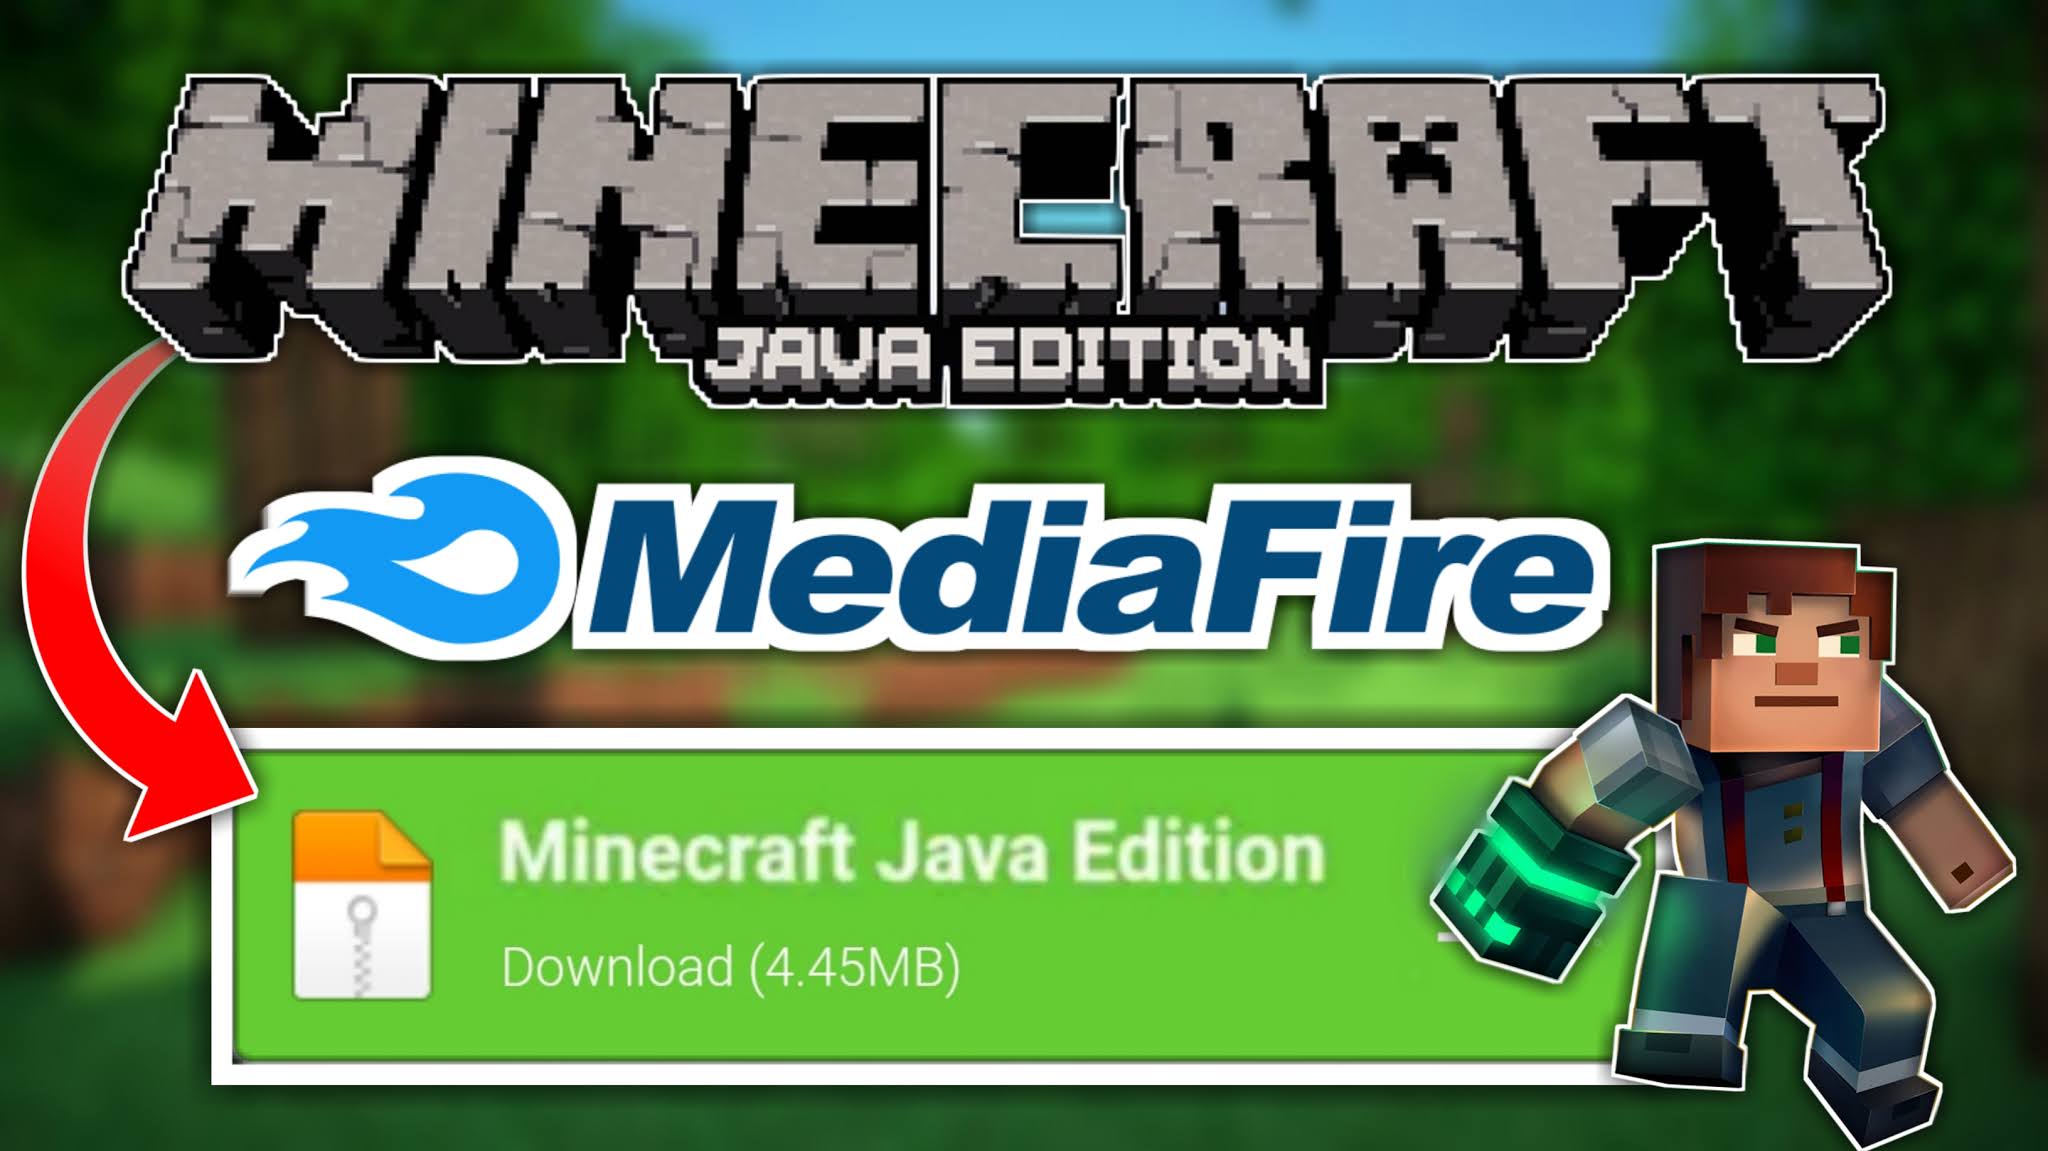 How To Download Minecraft Java Edition On Android Ios Minecraft Java Edition On Android 2020